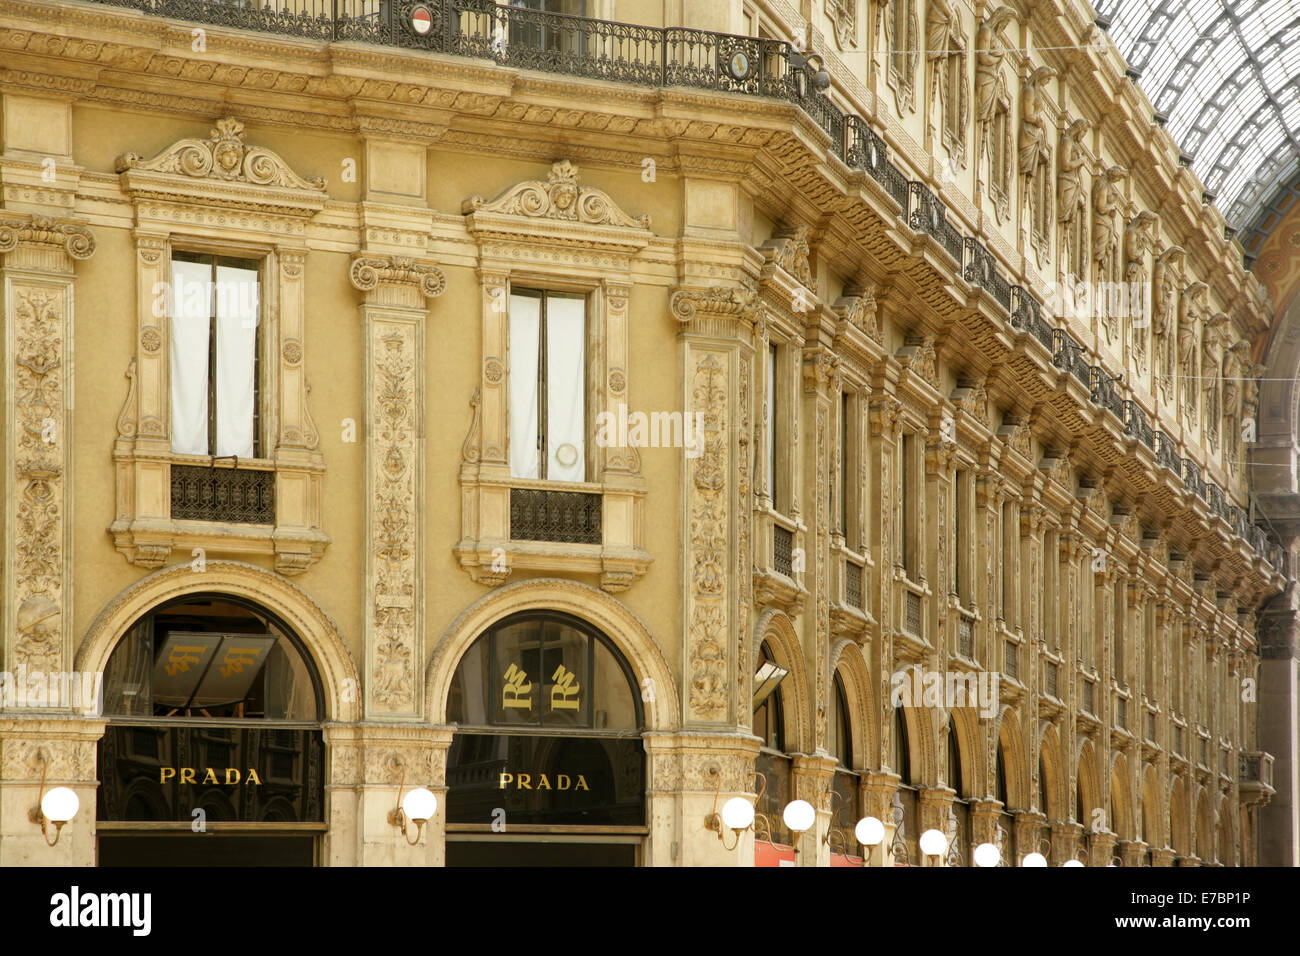 Prada Store Milan High Resolution Stock Photography and Images - Alamy